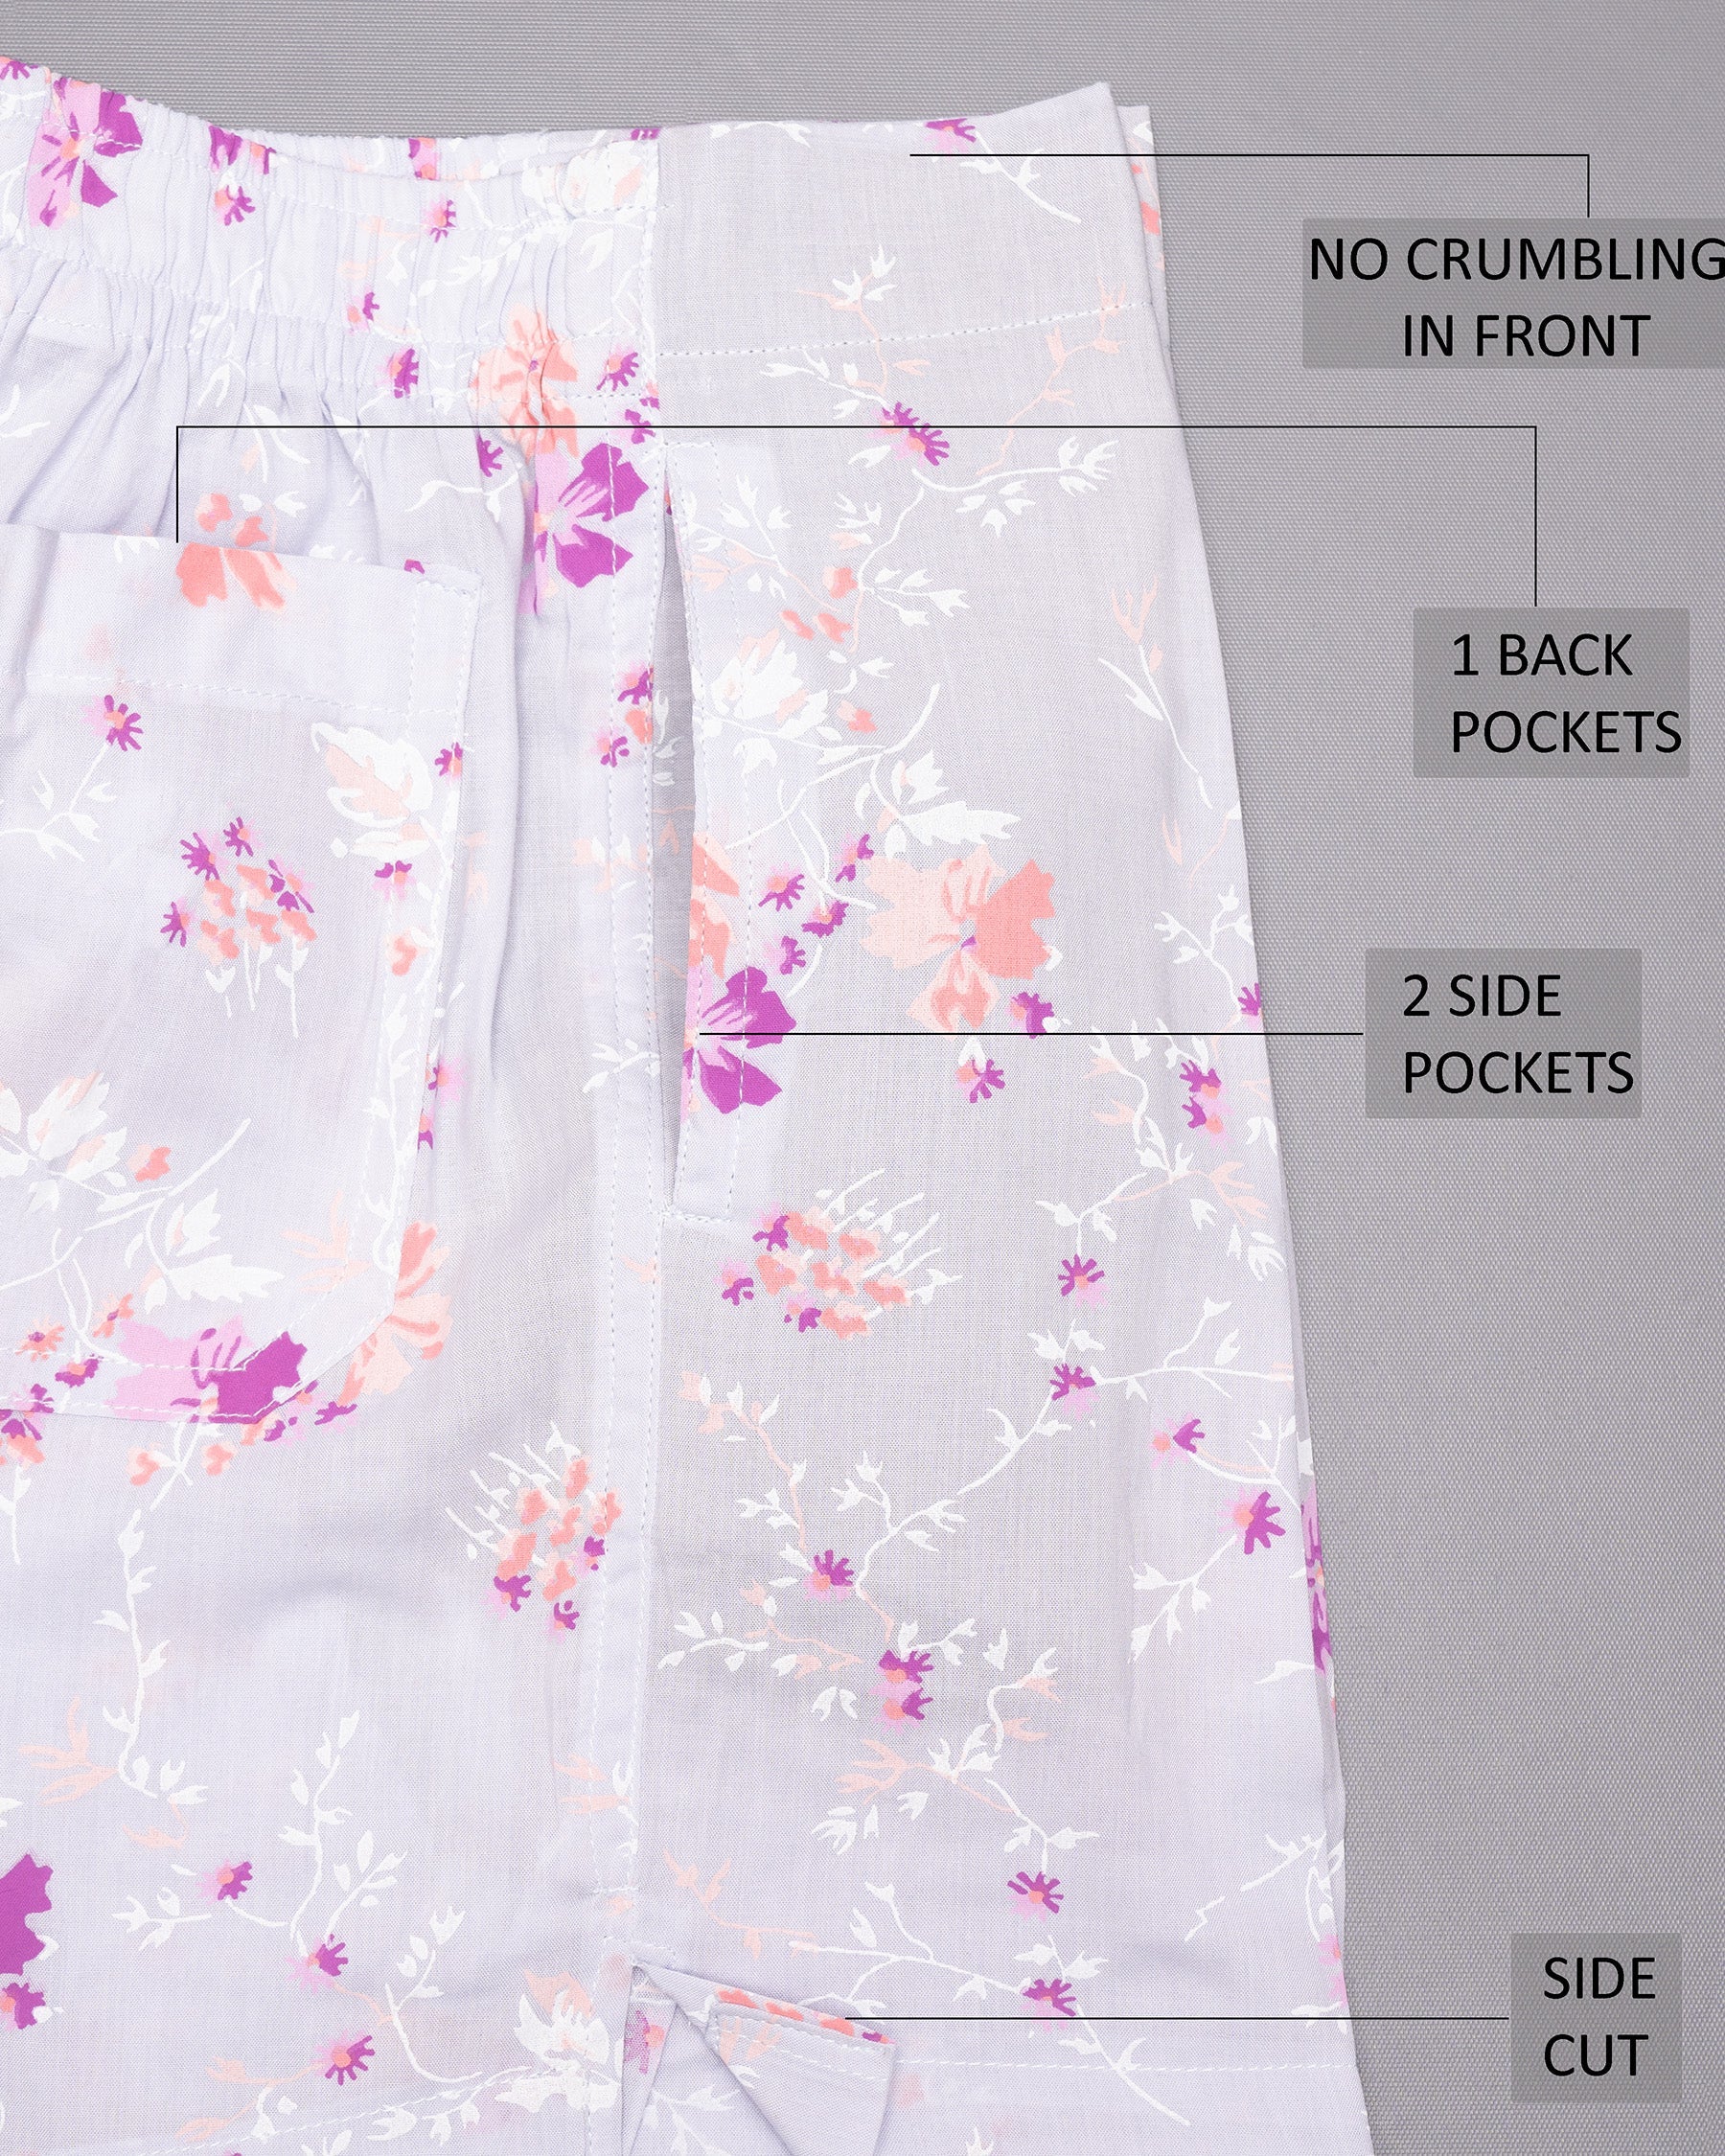 Snuff Orchid Light Grey Printed Tencel Boxers BX386-01-28, BX386-01-30, BX386-01-32, BX386-01-34, BX386-01-36, BX386-01-38, BX386-01-40, BX386-01-42, BX386-01-44